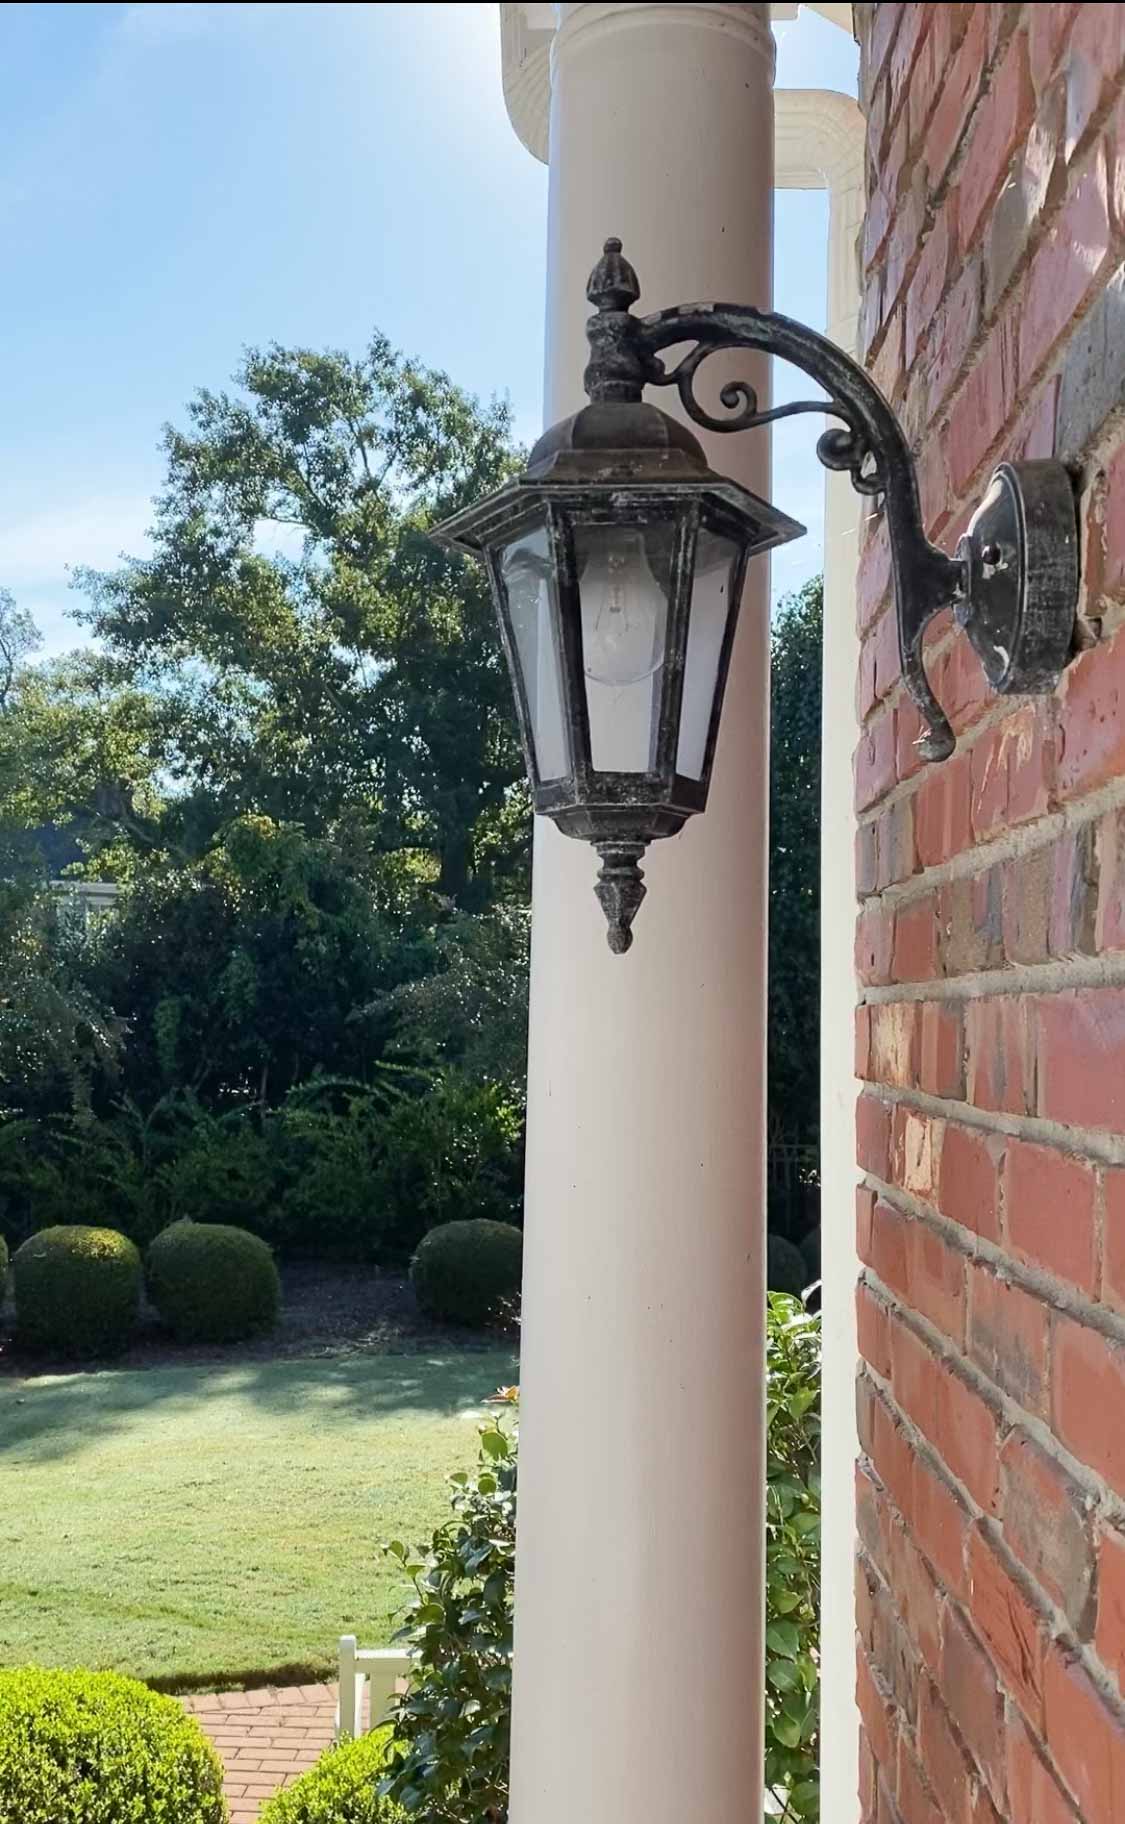 The outdoor sconces that we replaced